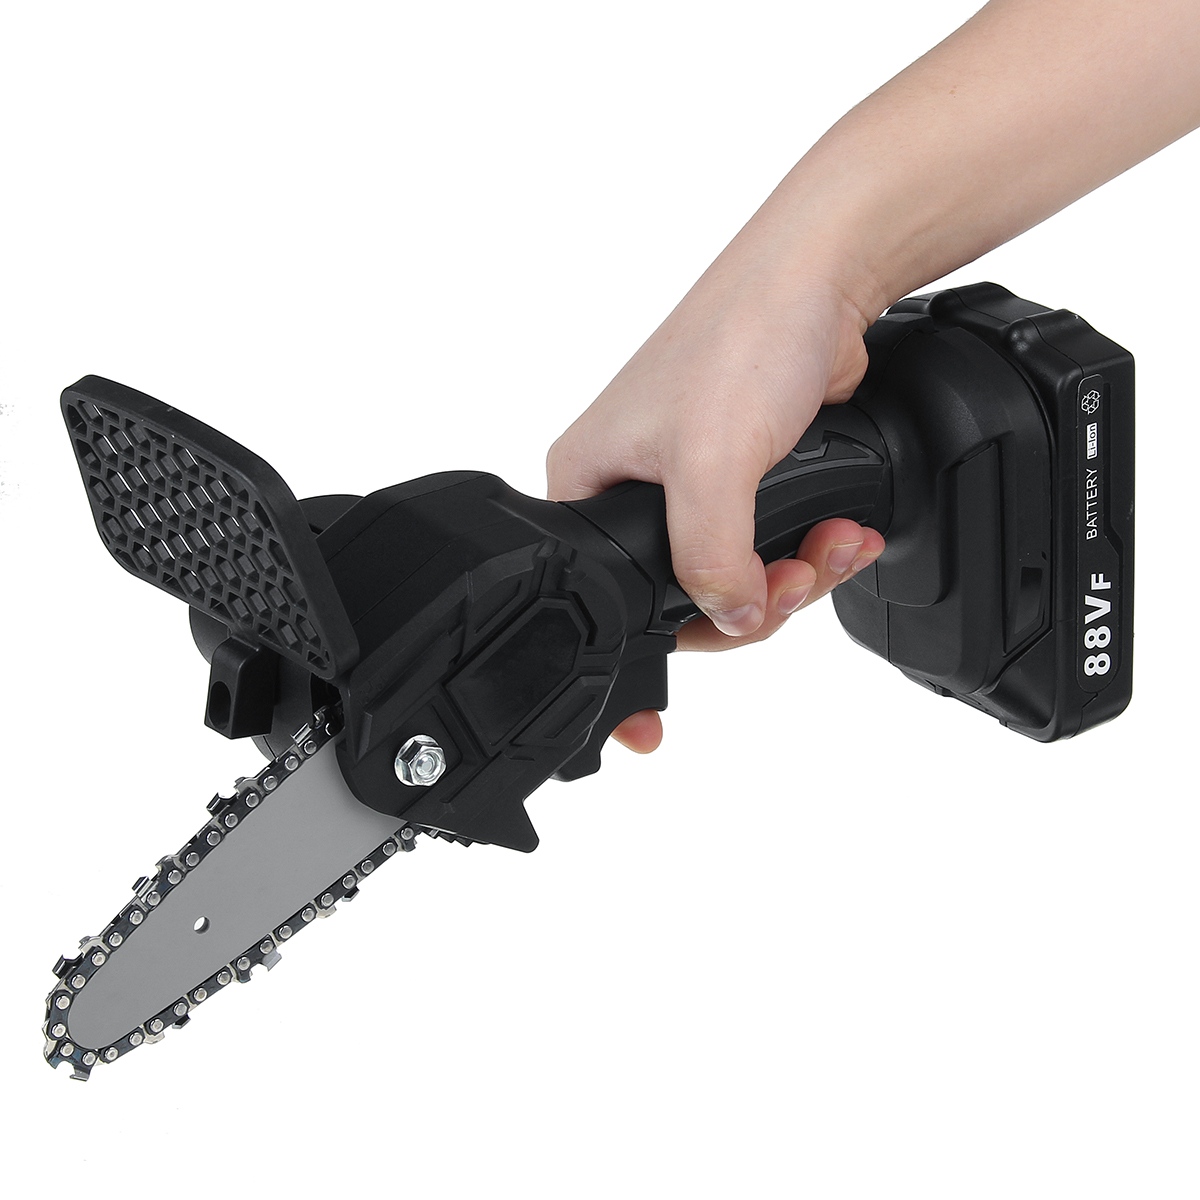 21V-Electric-Cordless-Chain-Saw-One-Hand-Saw-Woodworking-Tool-W-2pcs-Battery-1821600-6